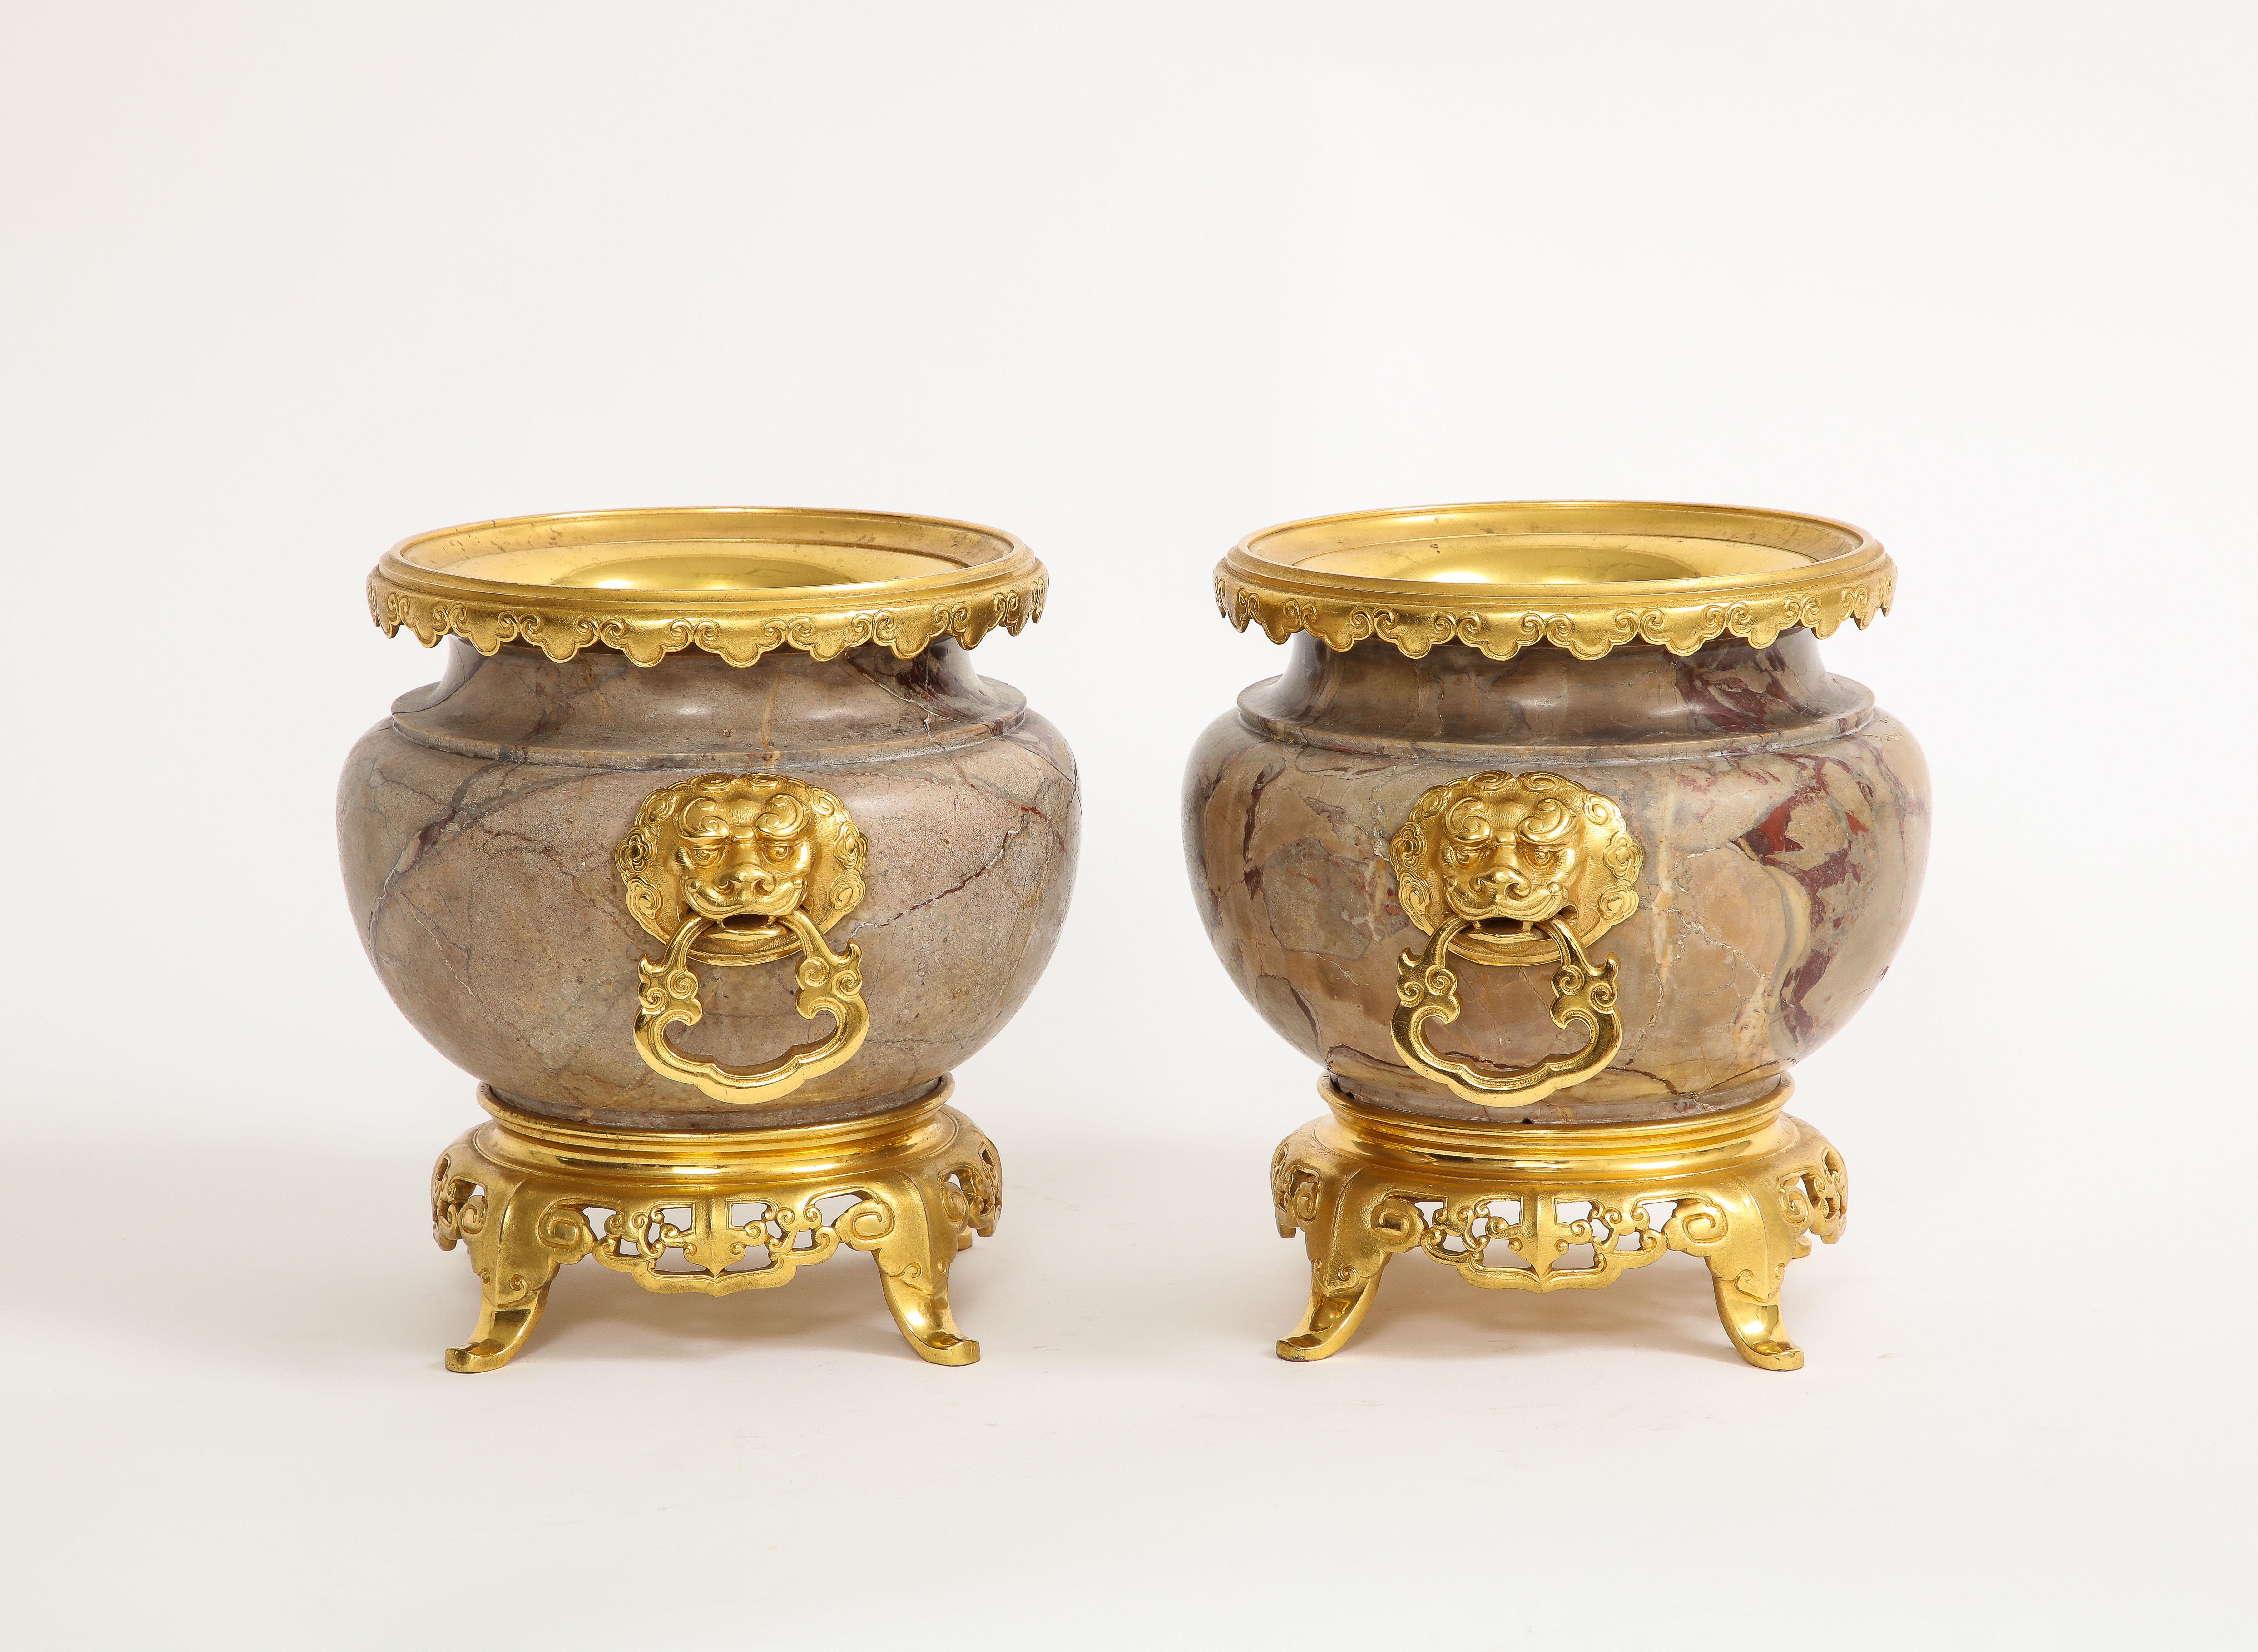 Chinoiserie Pair of 19th Century French Ormolu Mounted Marble Centerpieces, H. Journet & Cie For Sale